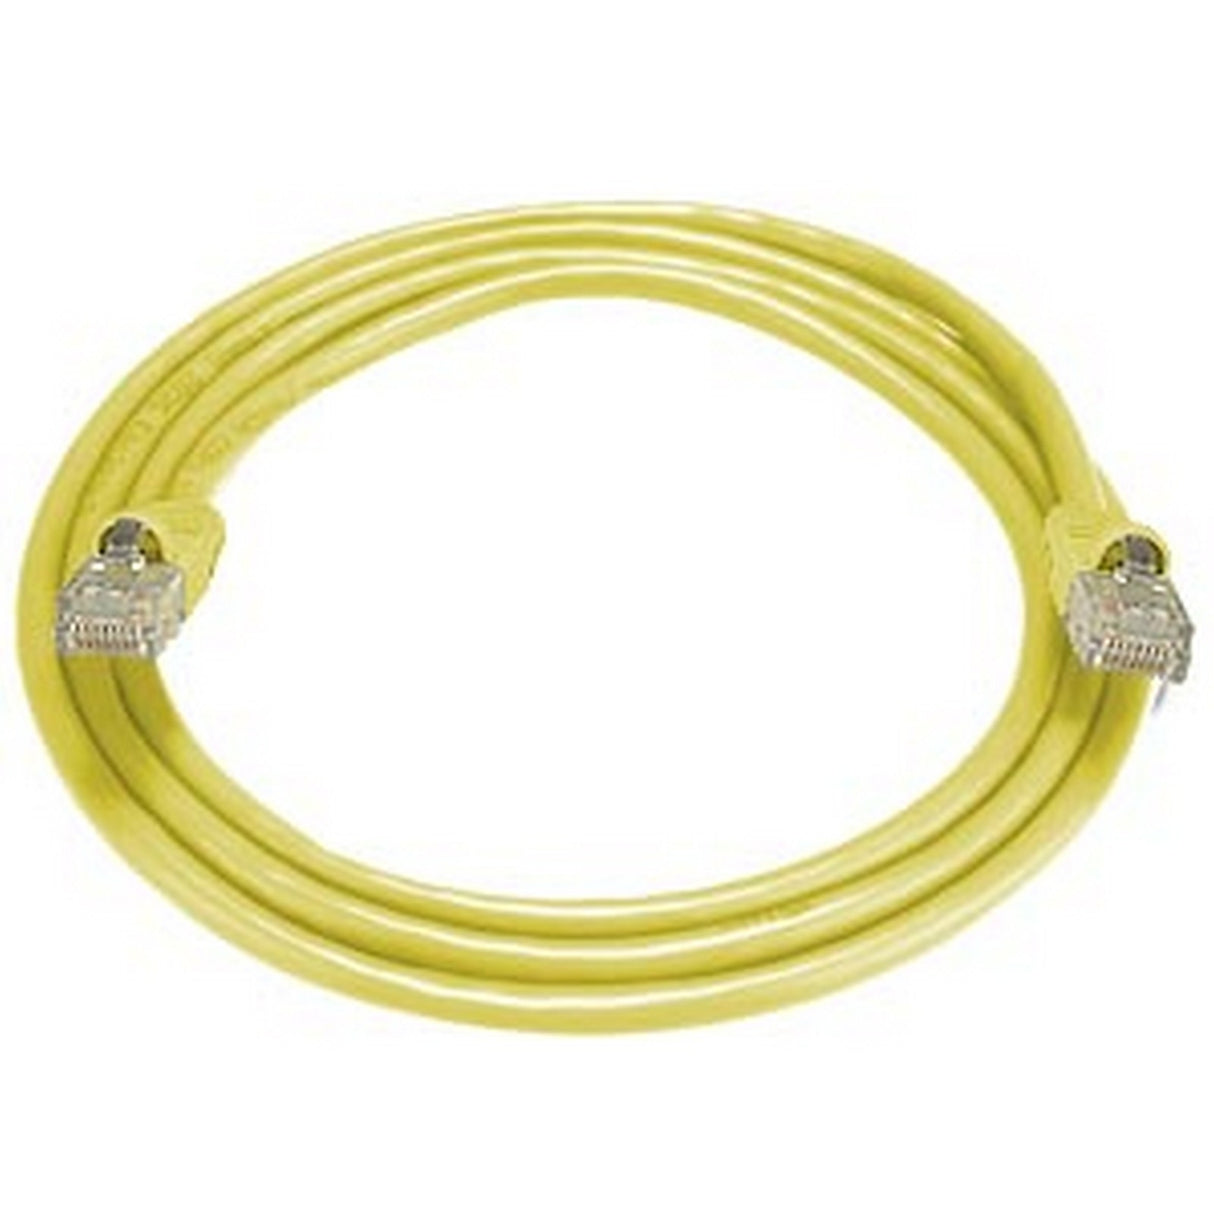 NTI CAT5E-3-YELLOW CAT5e Stranded Unshielded Cable, Yellow, 3-Foot